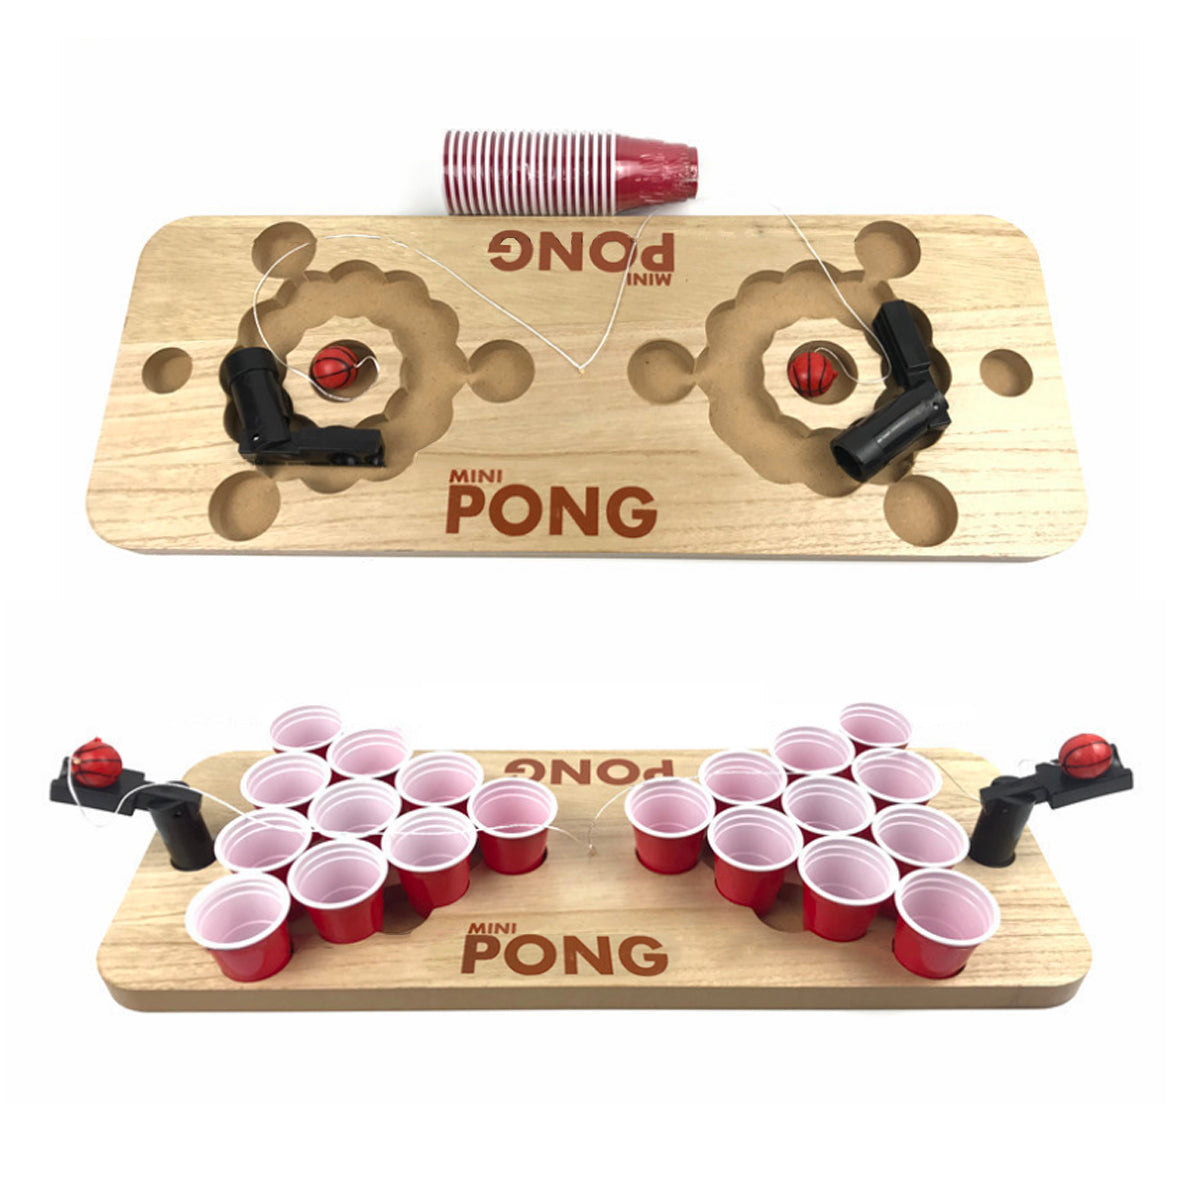 Tabletop Beer Pong Drinking Game